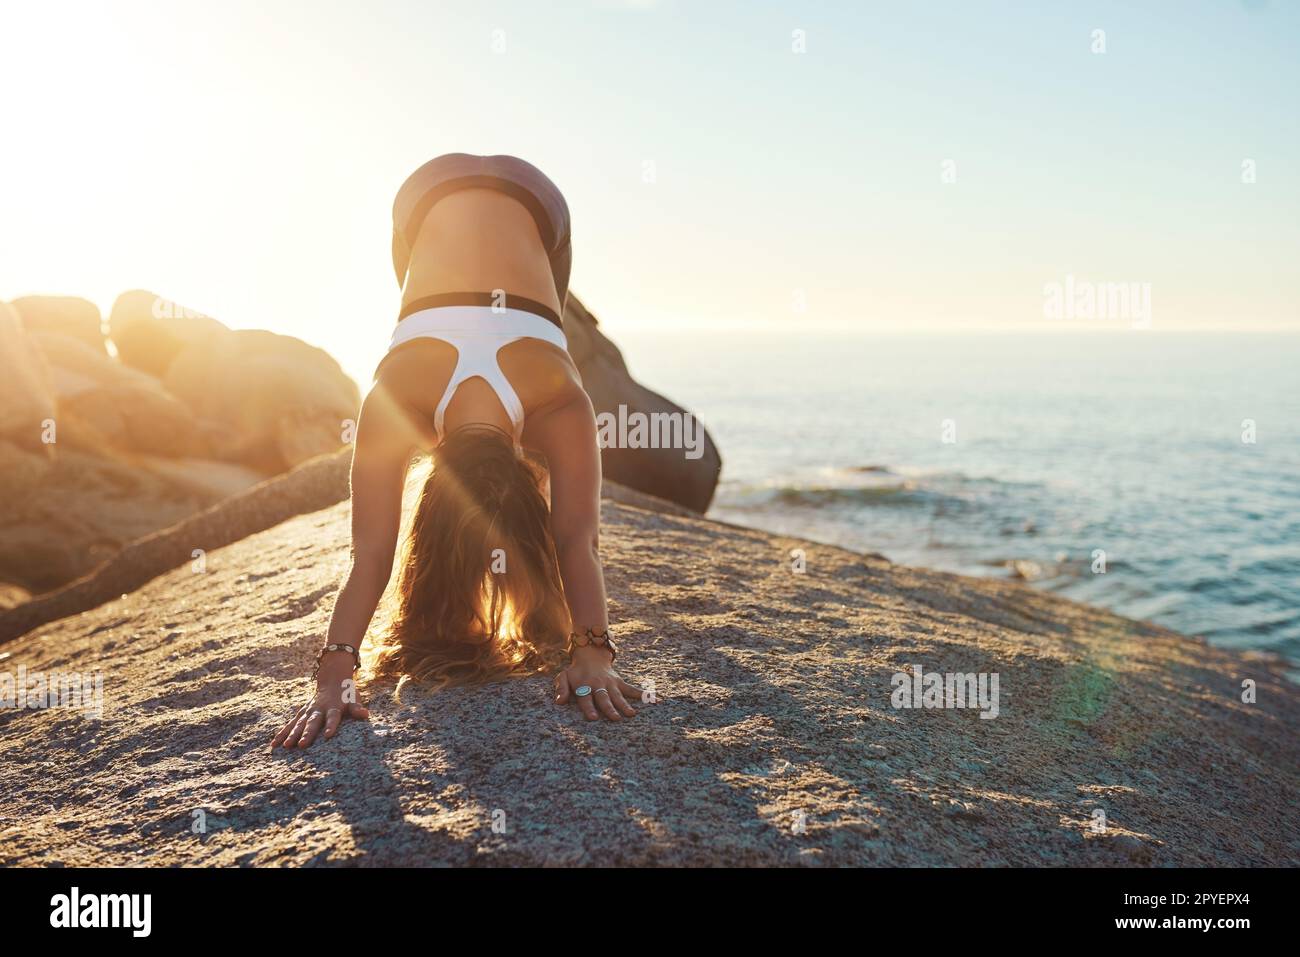 Because yoga will get you back on track. an athletic young woman practicing yoga on the beach. Stock Photo